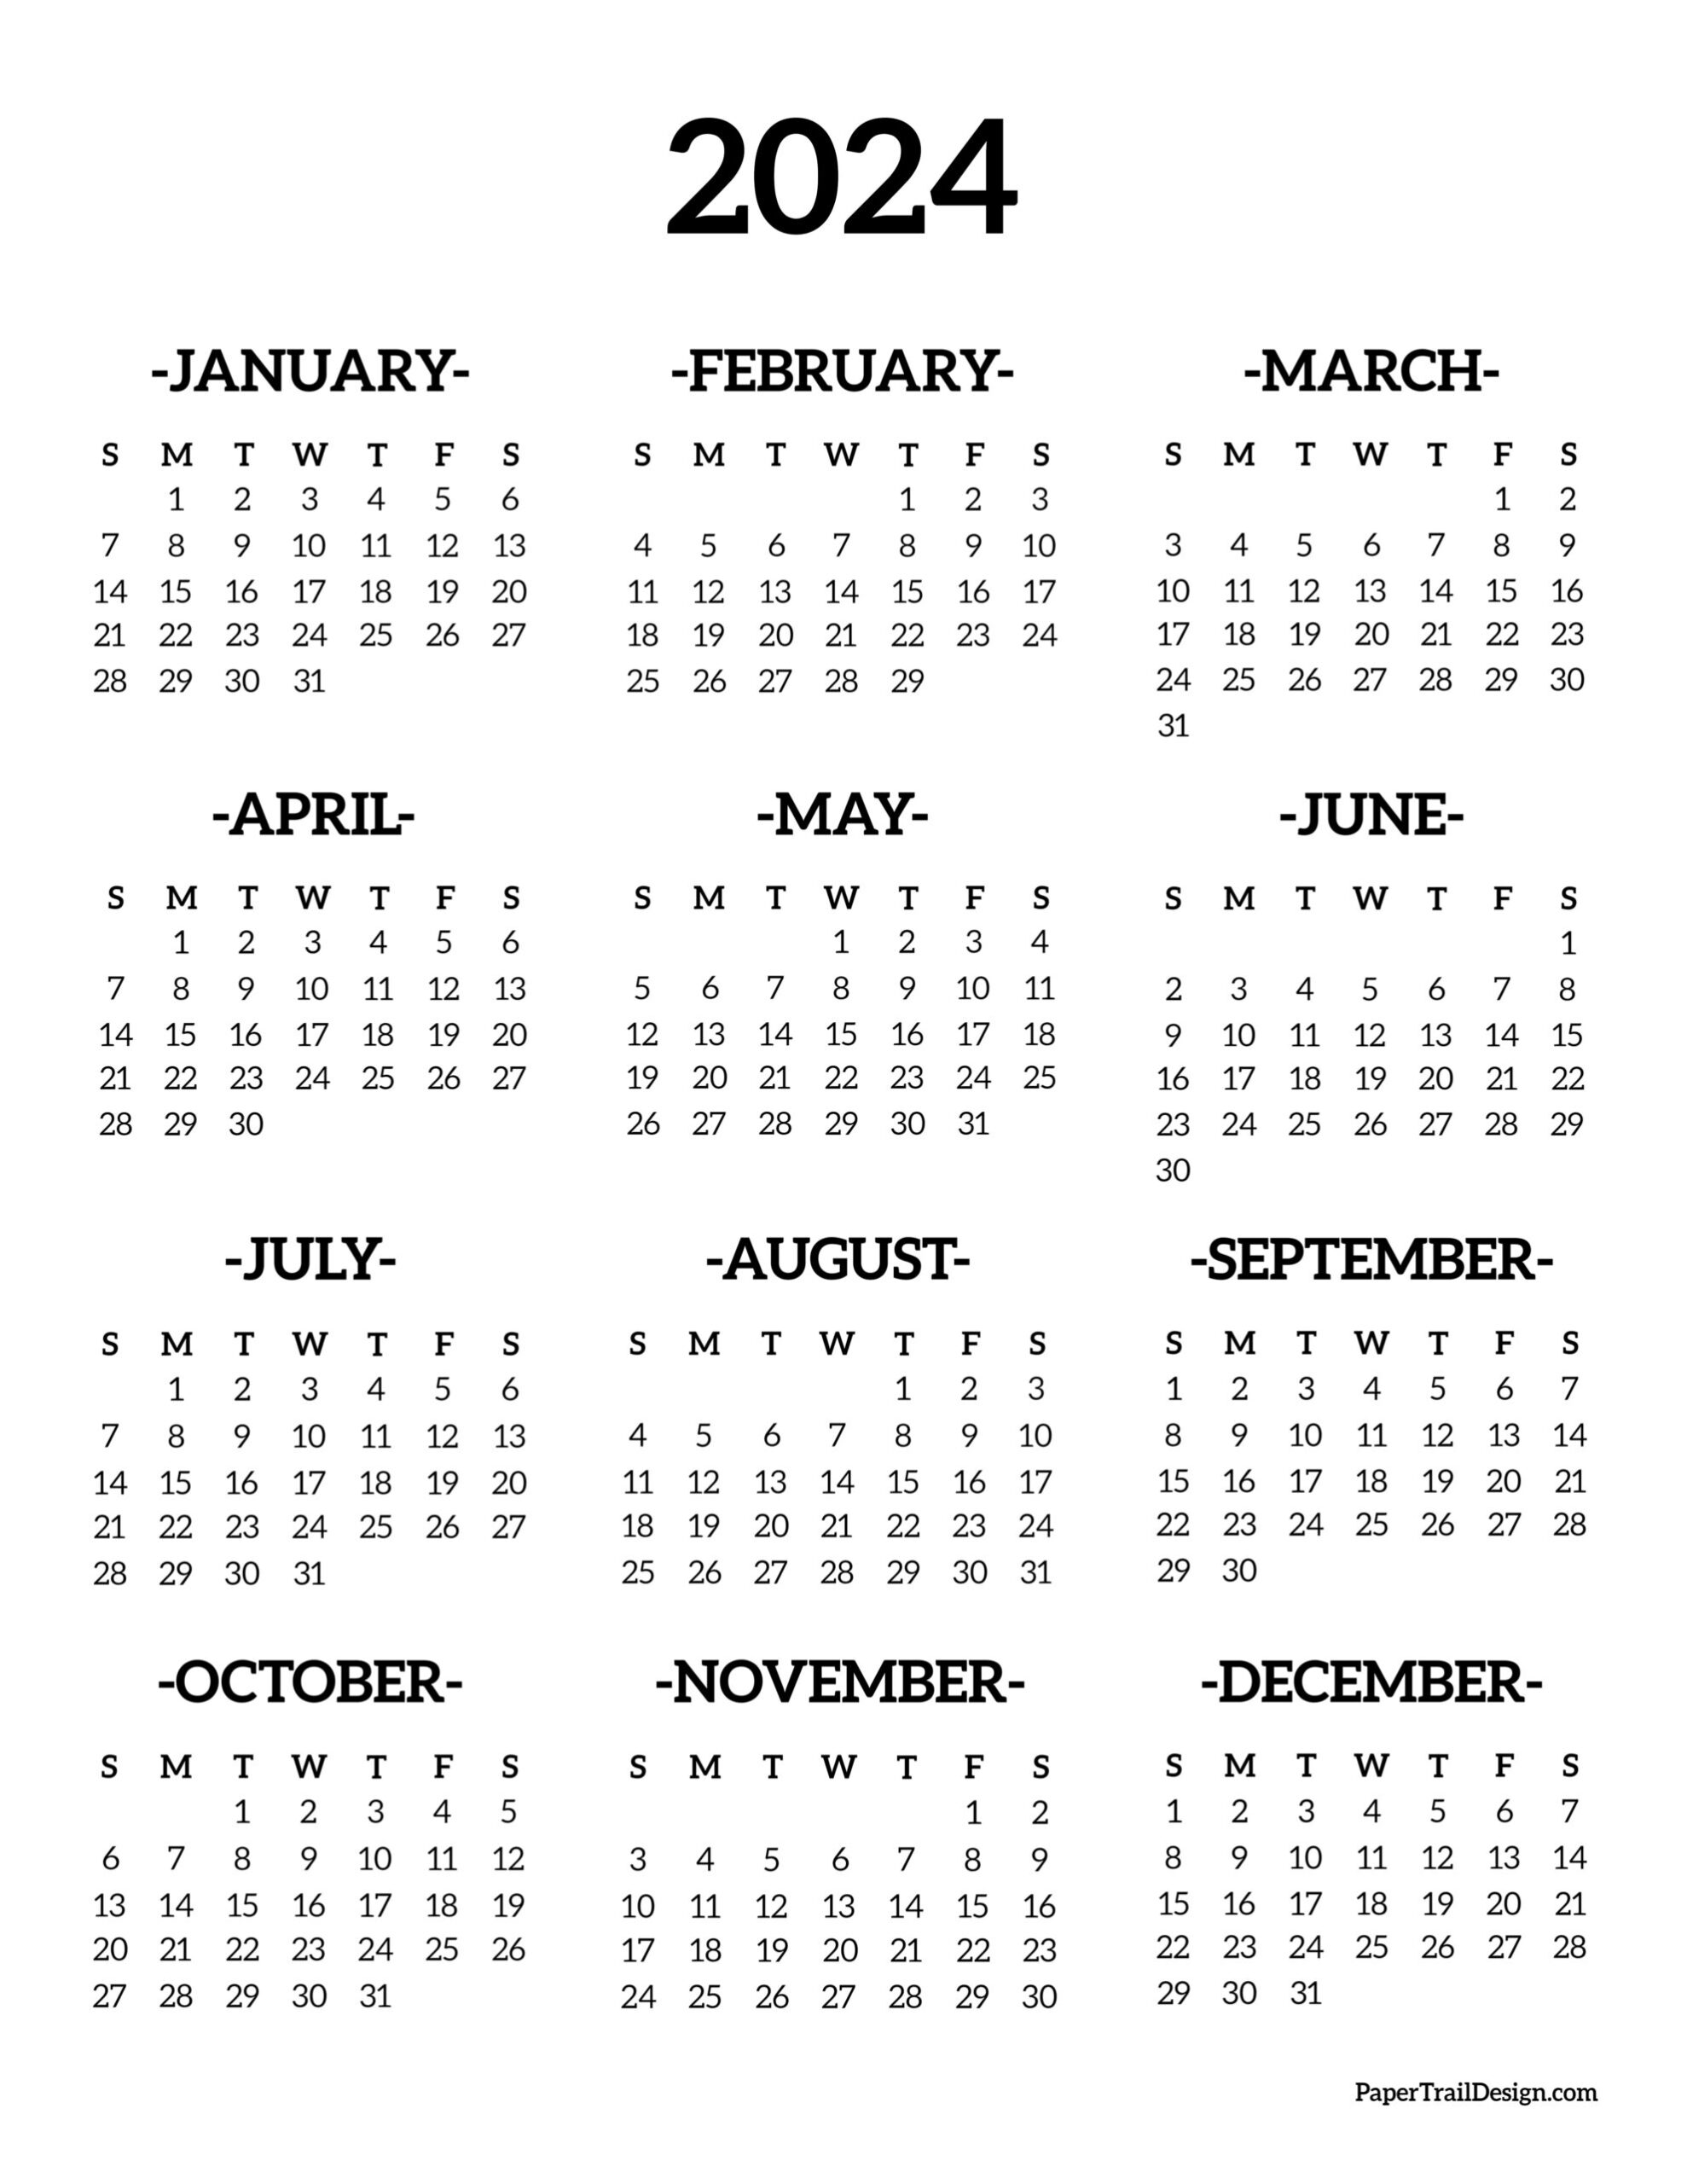 Calendar 2024 Printable One Page - Paper Trail Design for Yearly Calendar Free Printable 2024